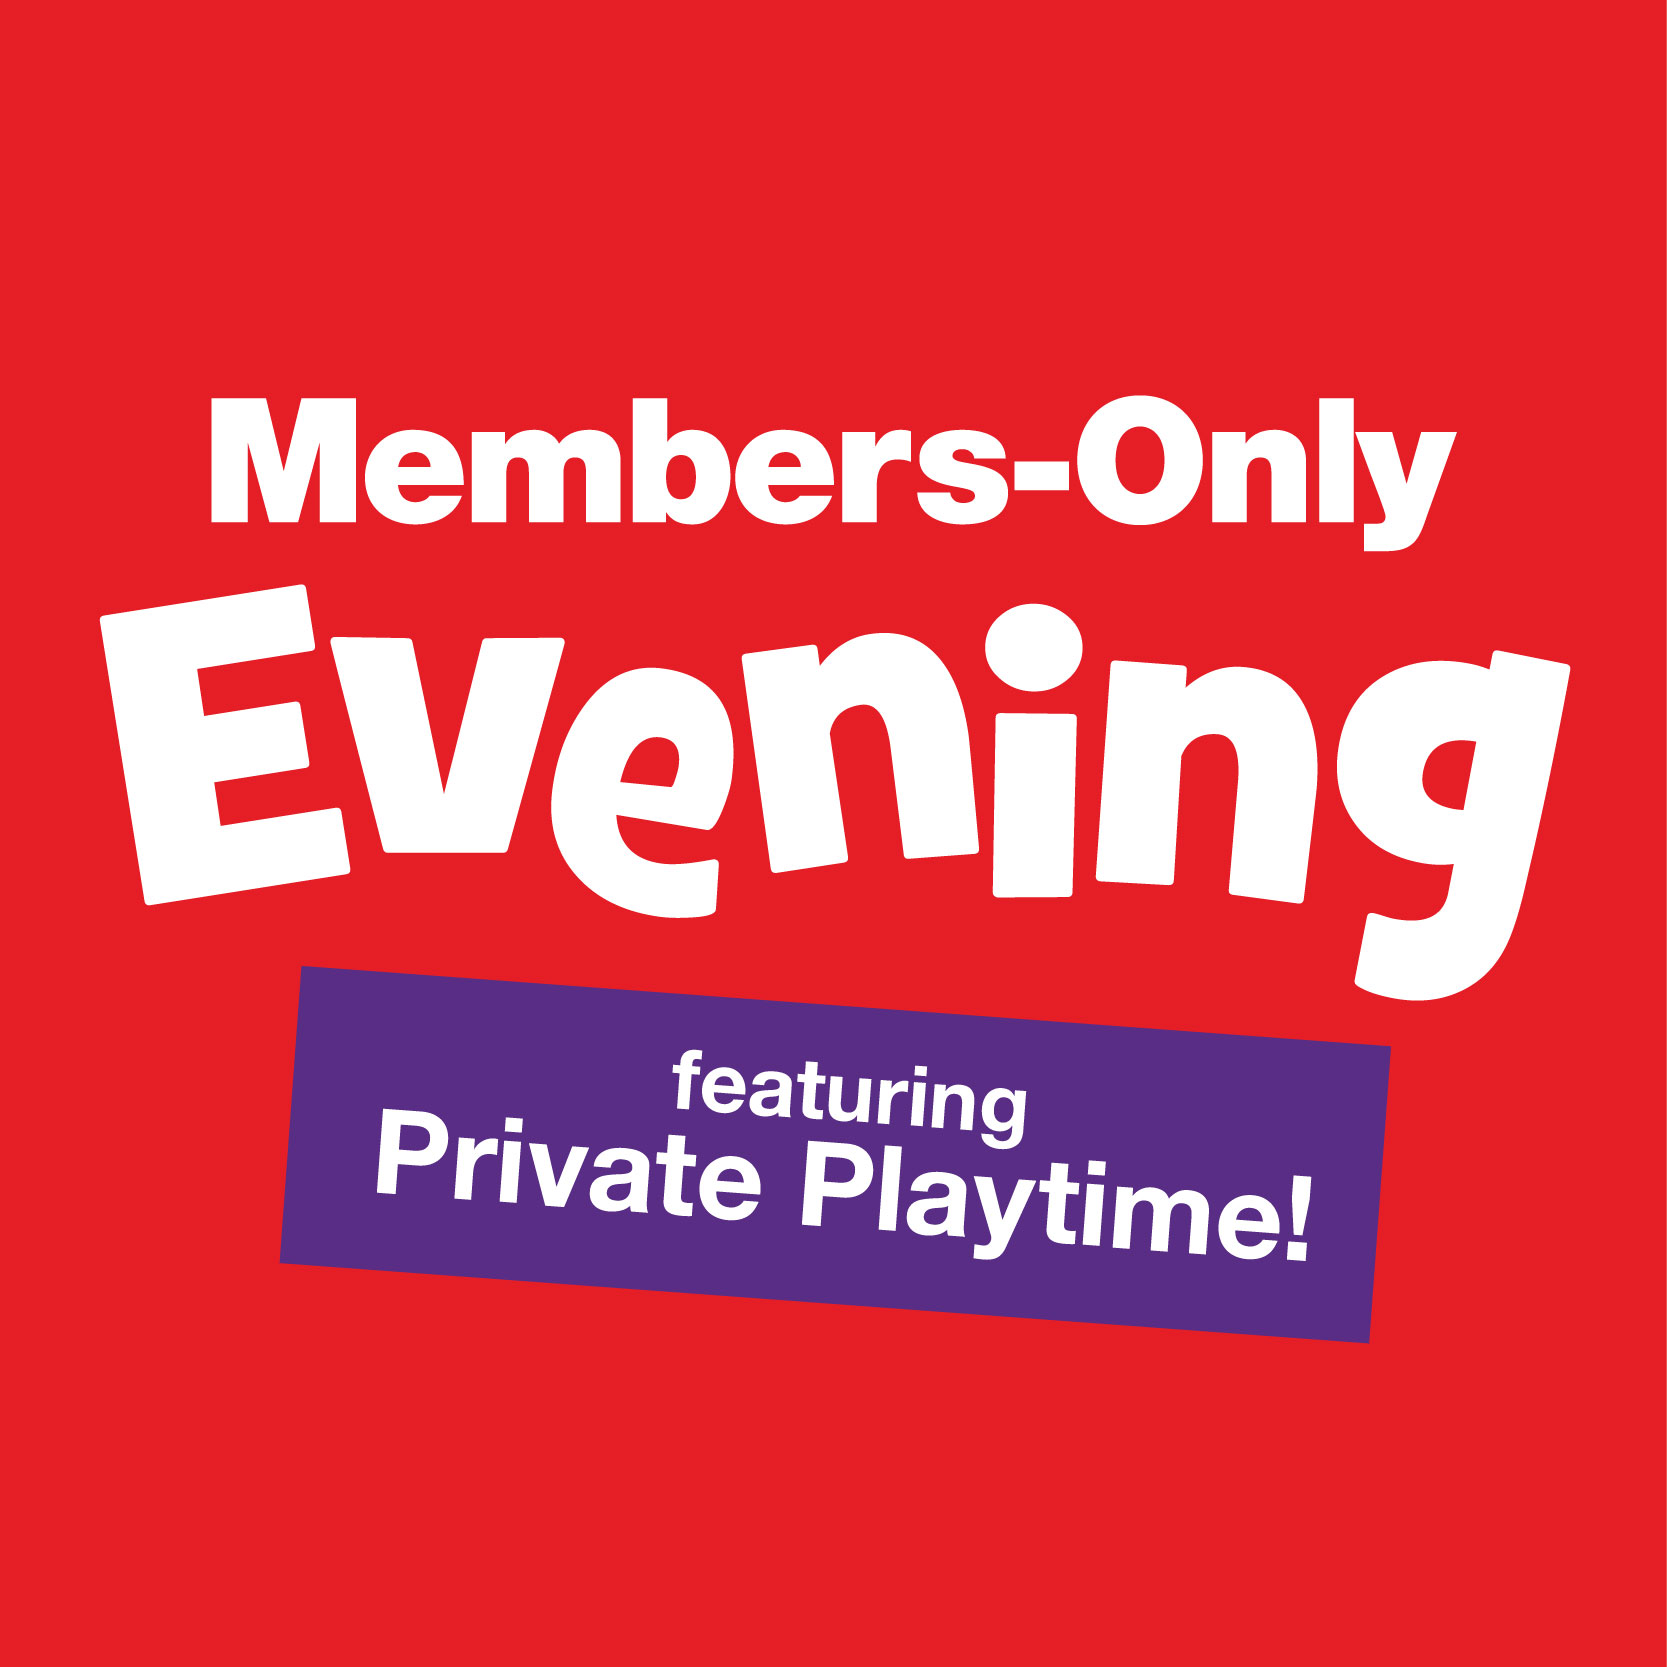 Members-Only Evening